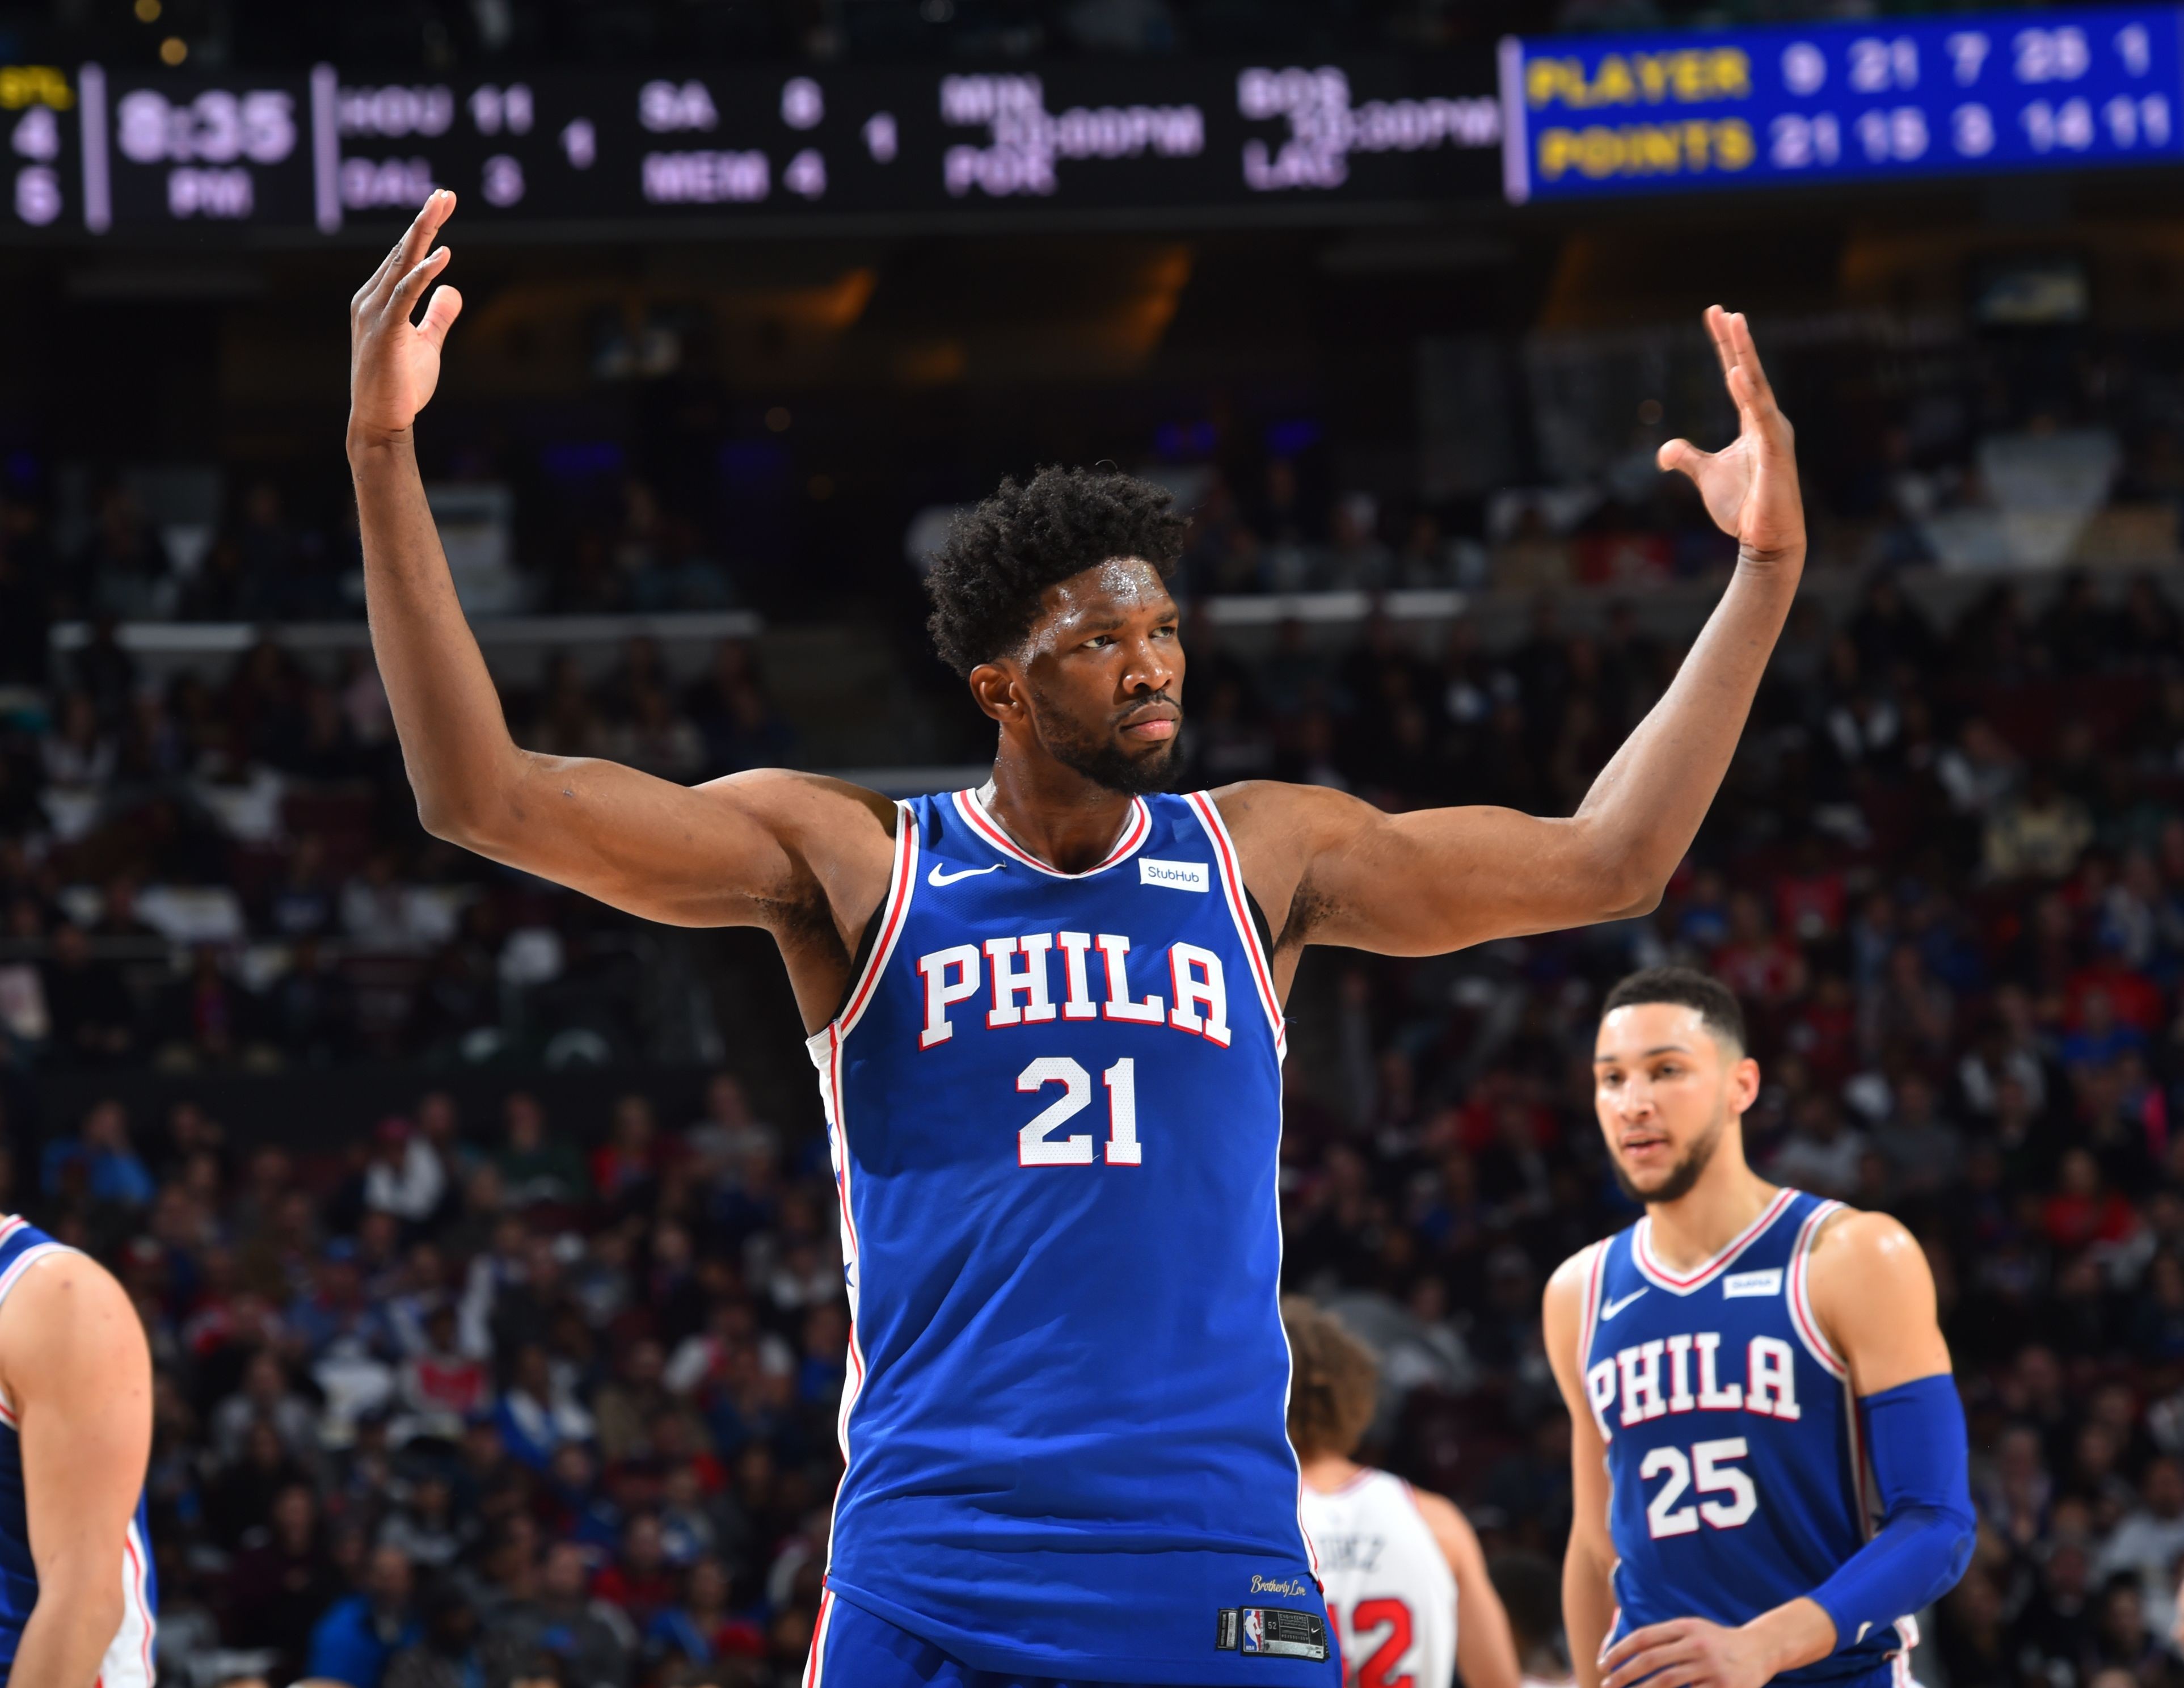 Joel Embiid will be by elite guard play in AllStar game